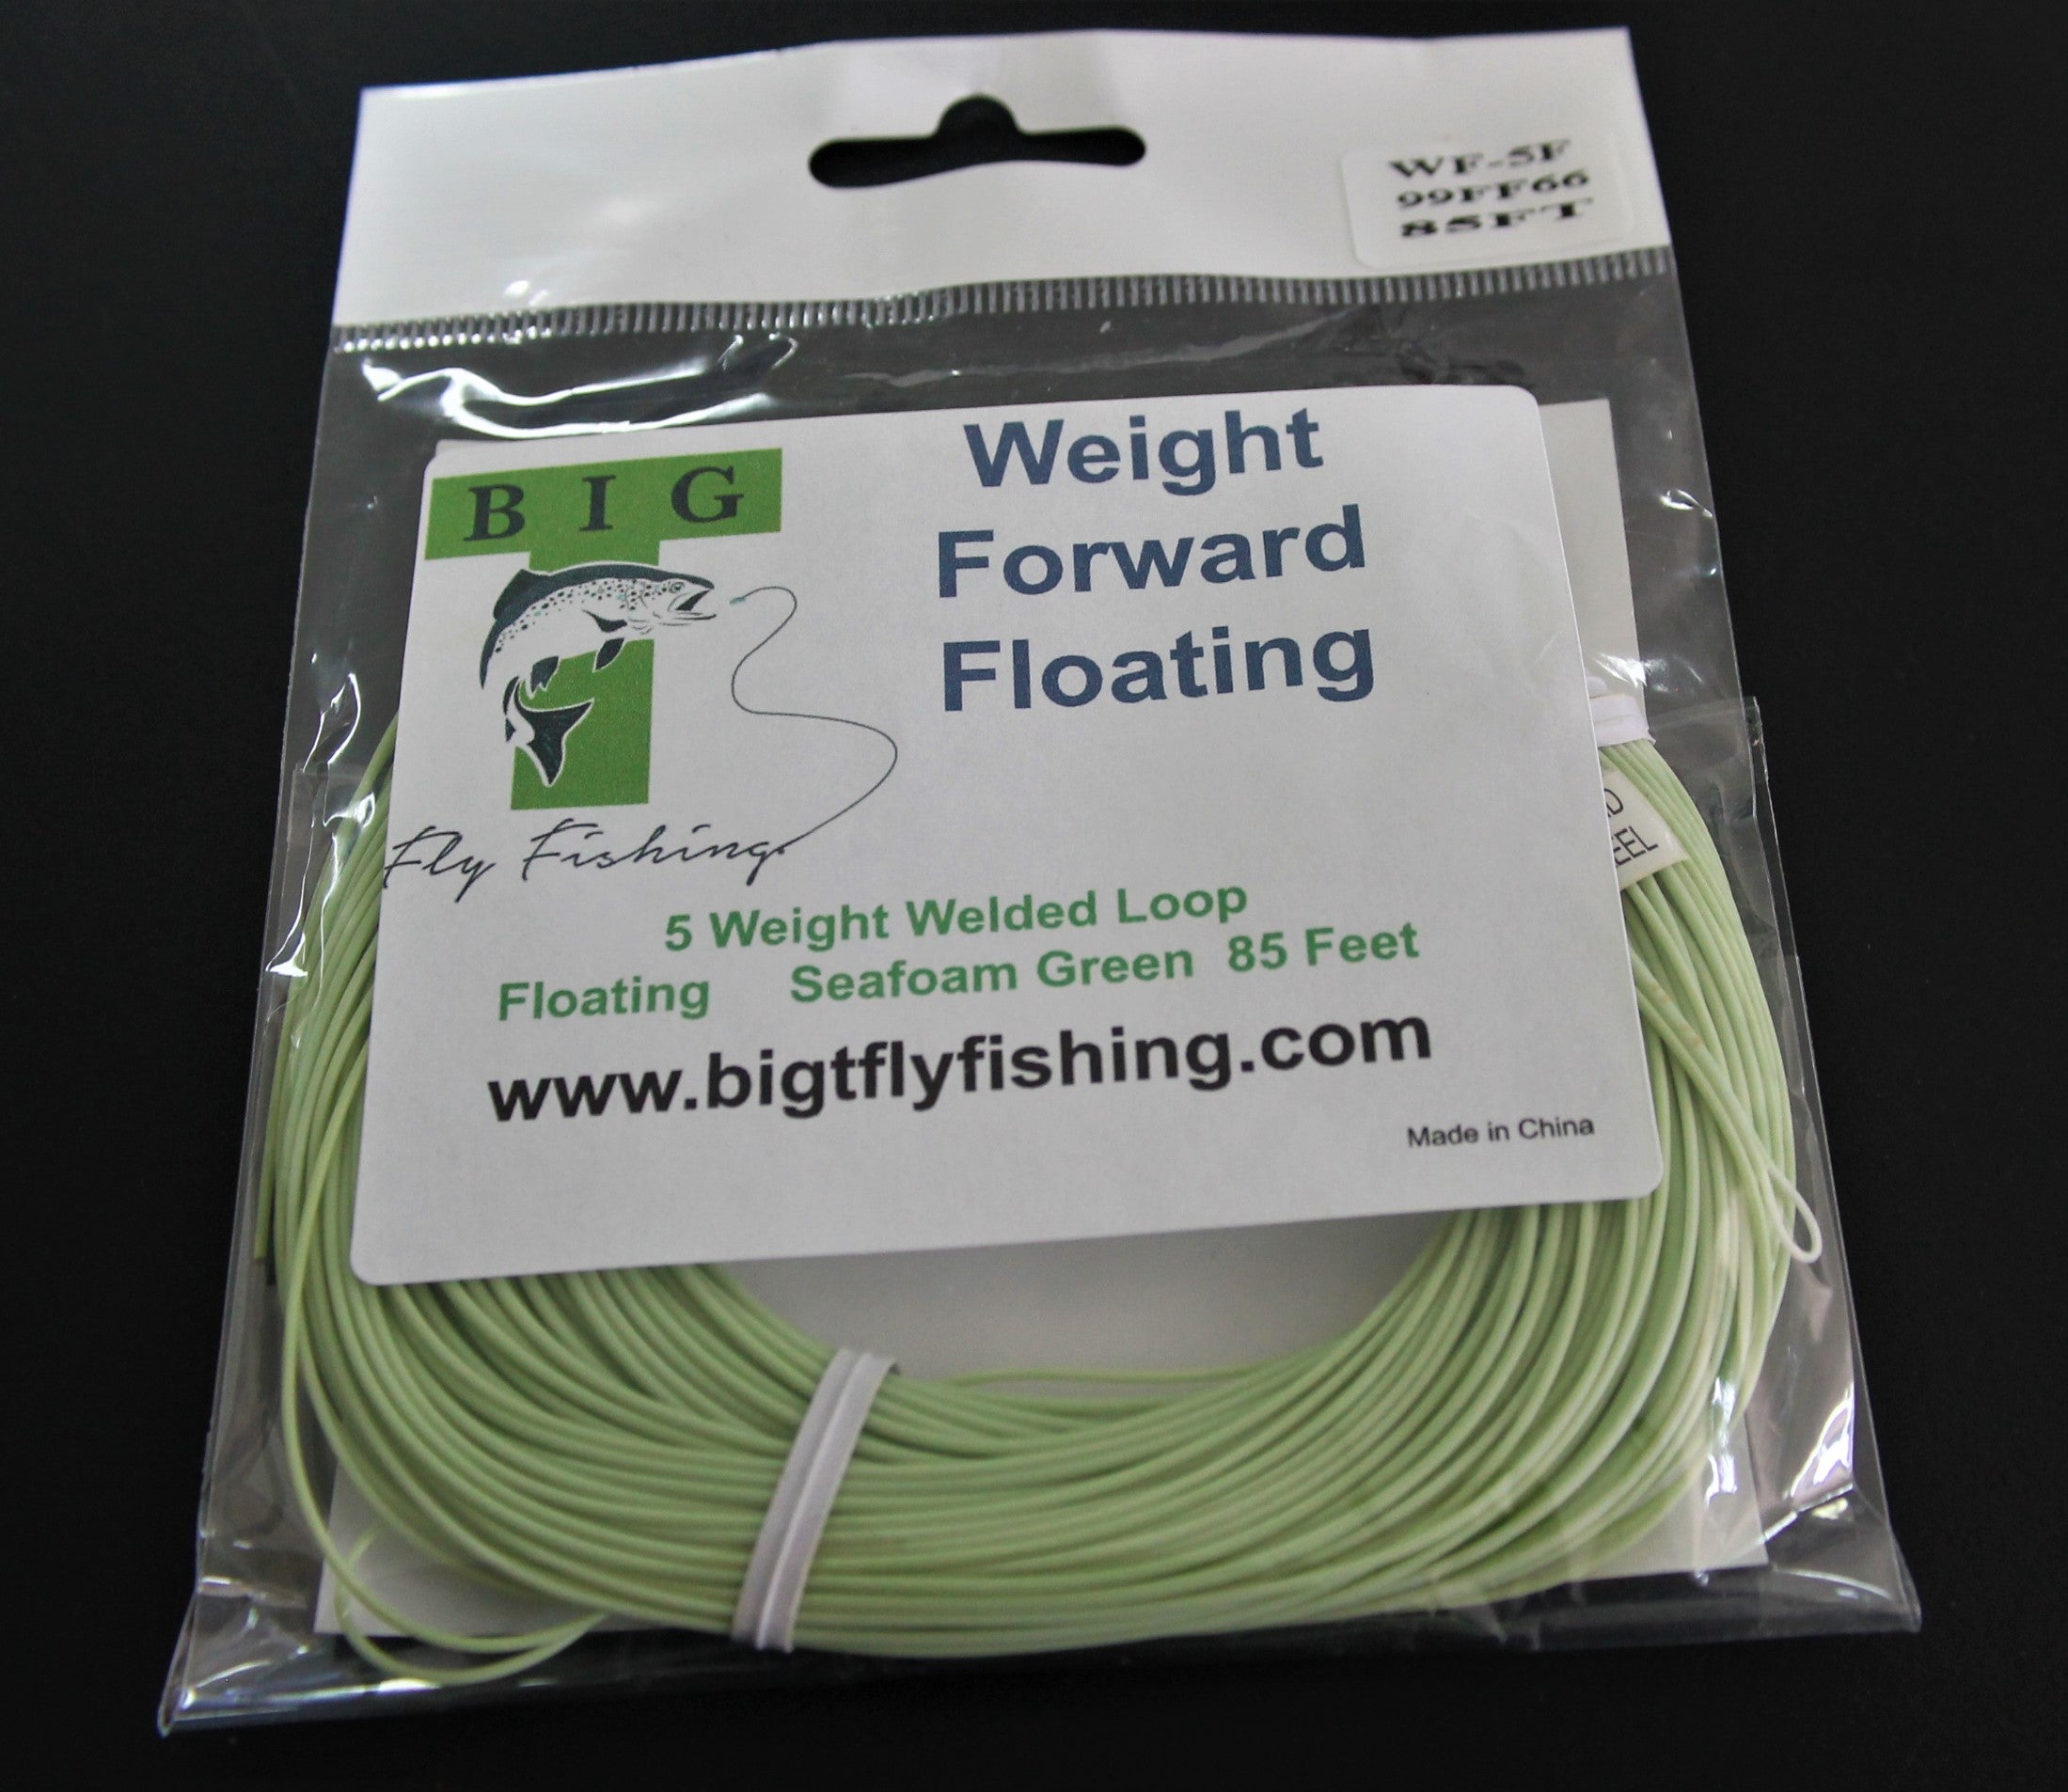 100FT Fly Fishing Line Orange 2F,3F,4F,5F,6F,7F,8F Isafish Fly line Weight Forward Floating Line with Welded Loop WF-7F